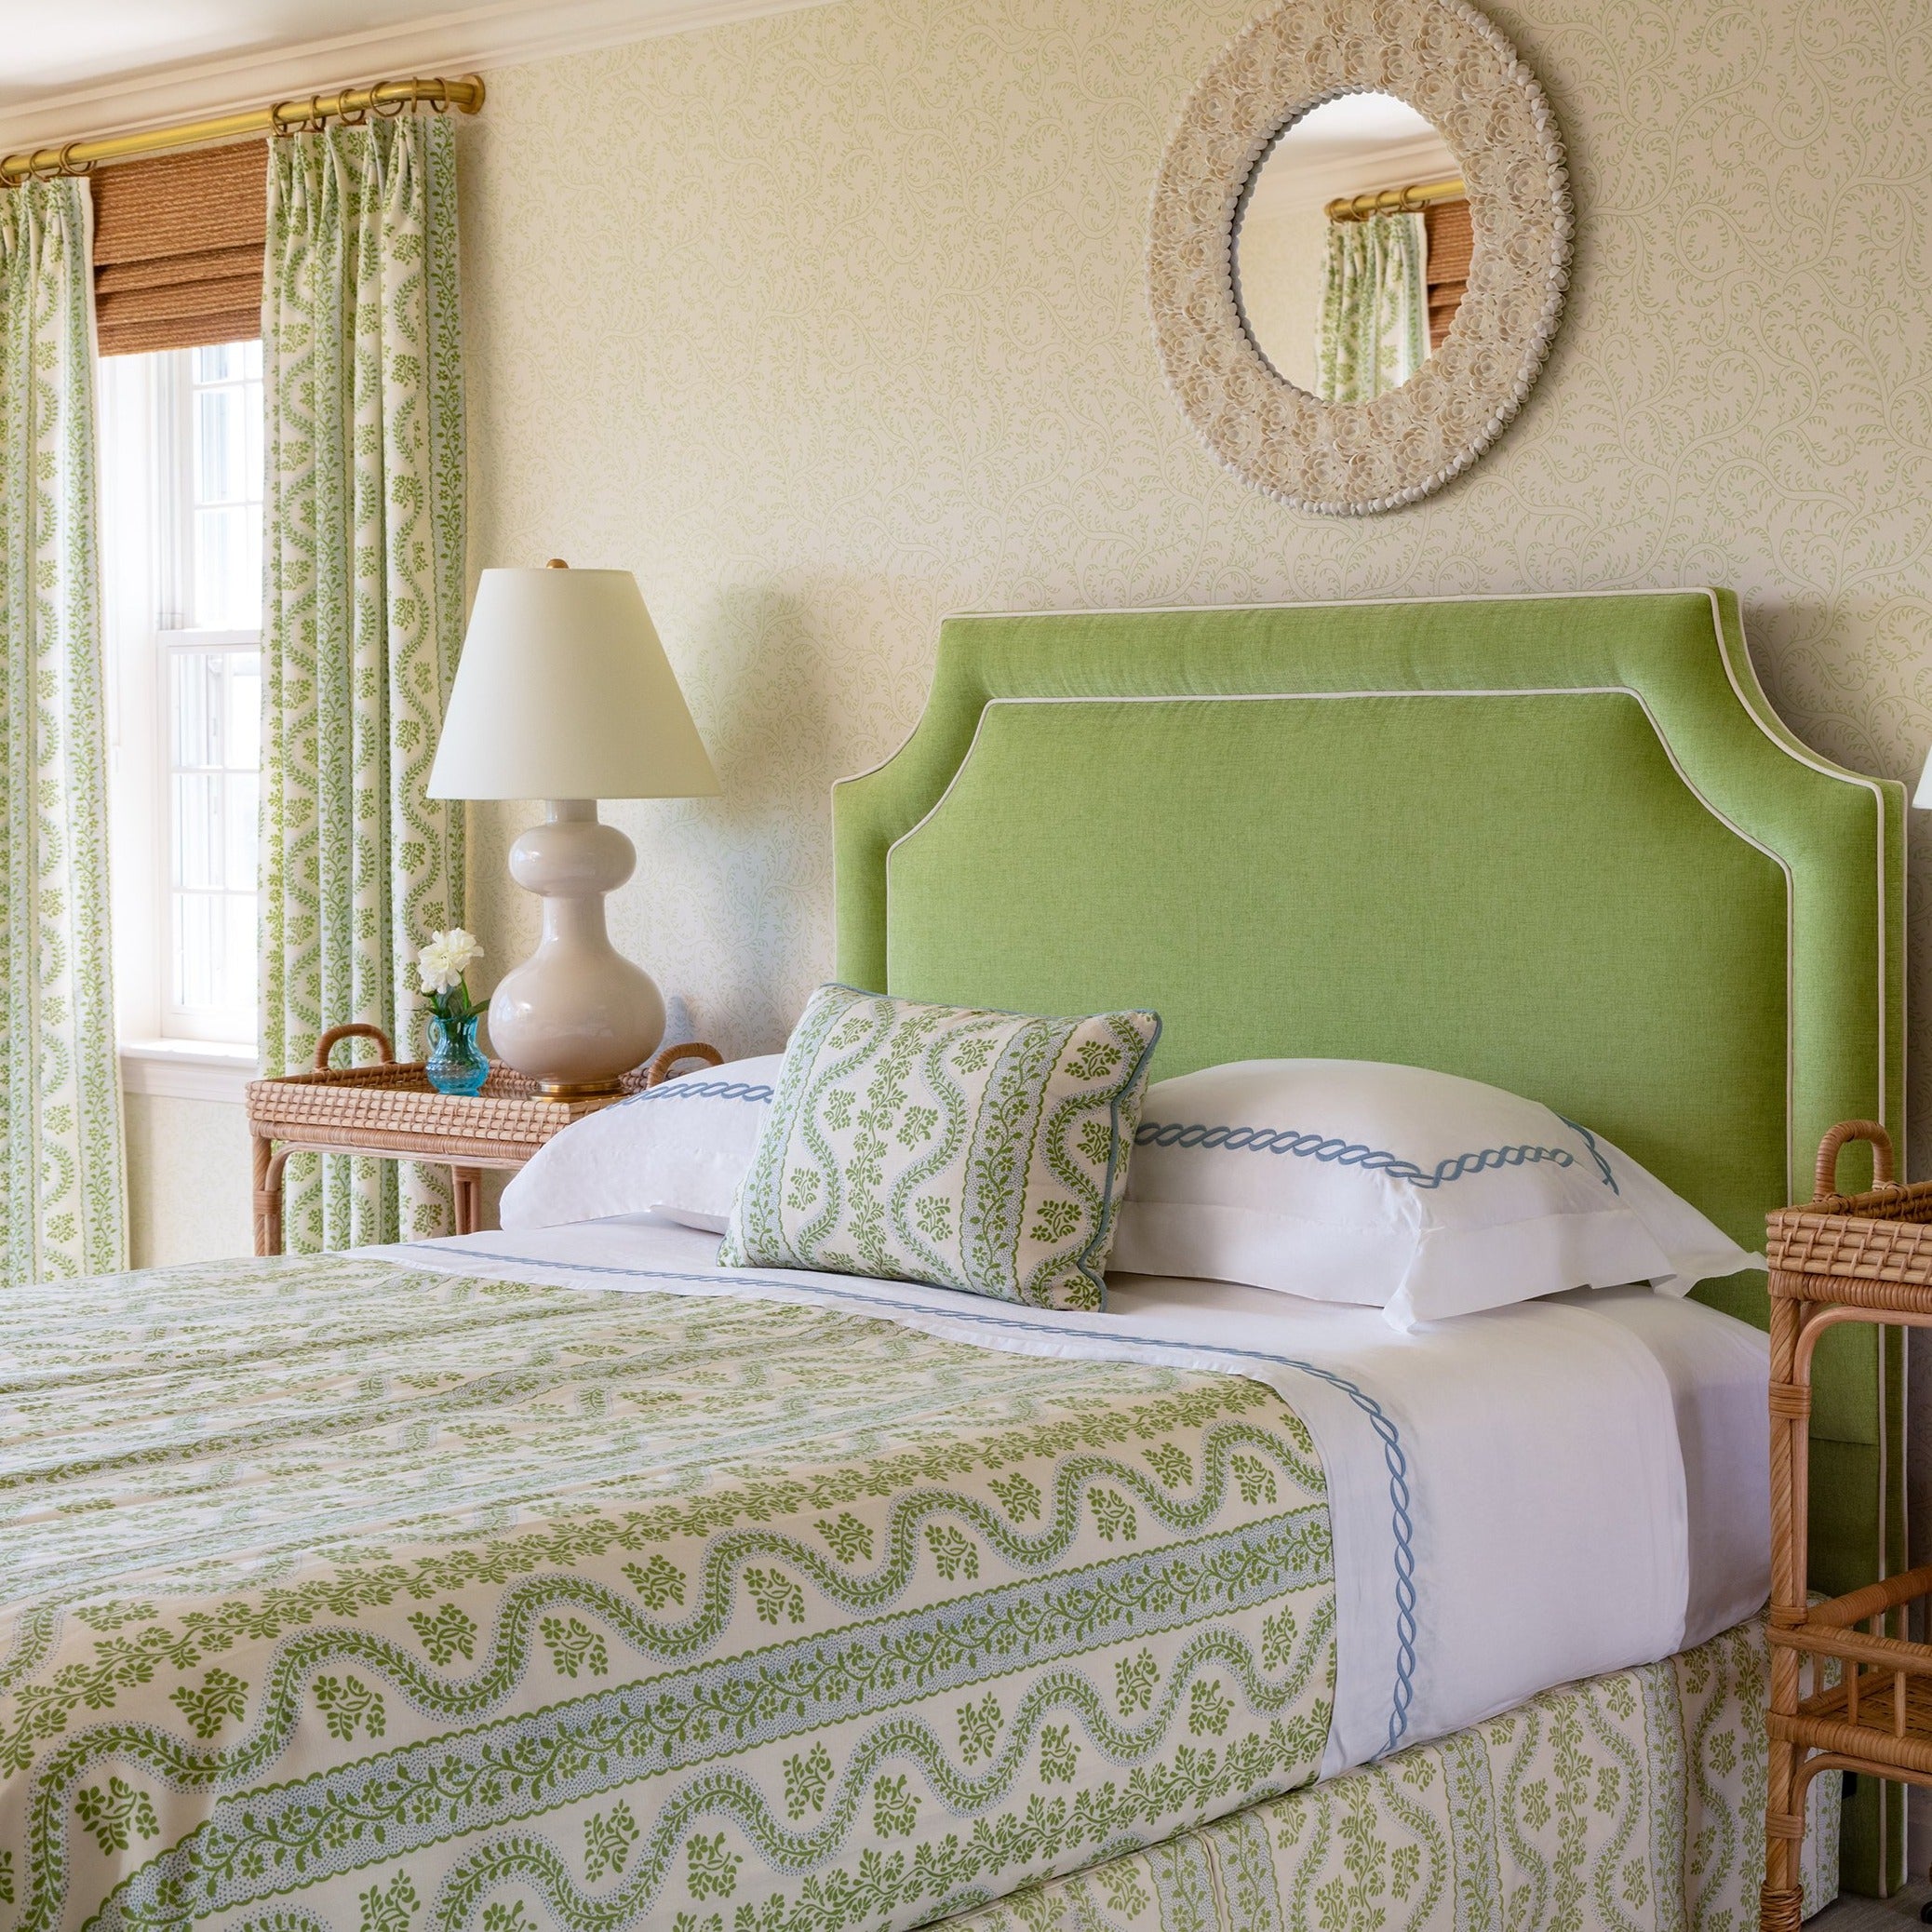 [Install] Design by Shorebird Interiors, Photo by Kyle J. Caldwell color name:Lettuce Green